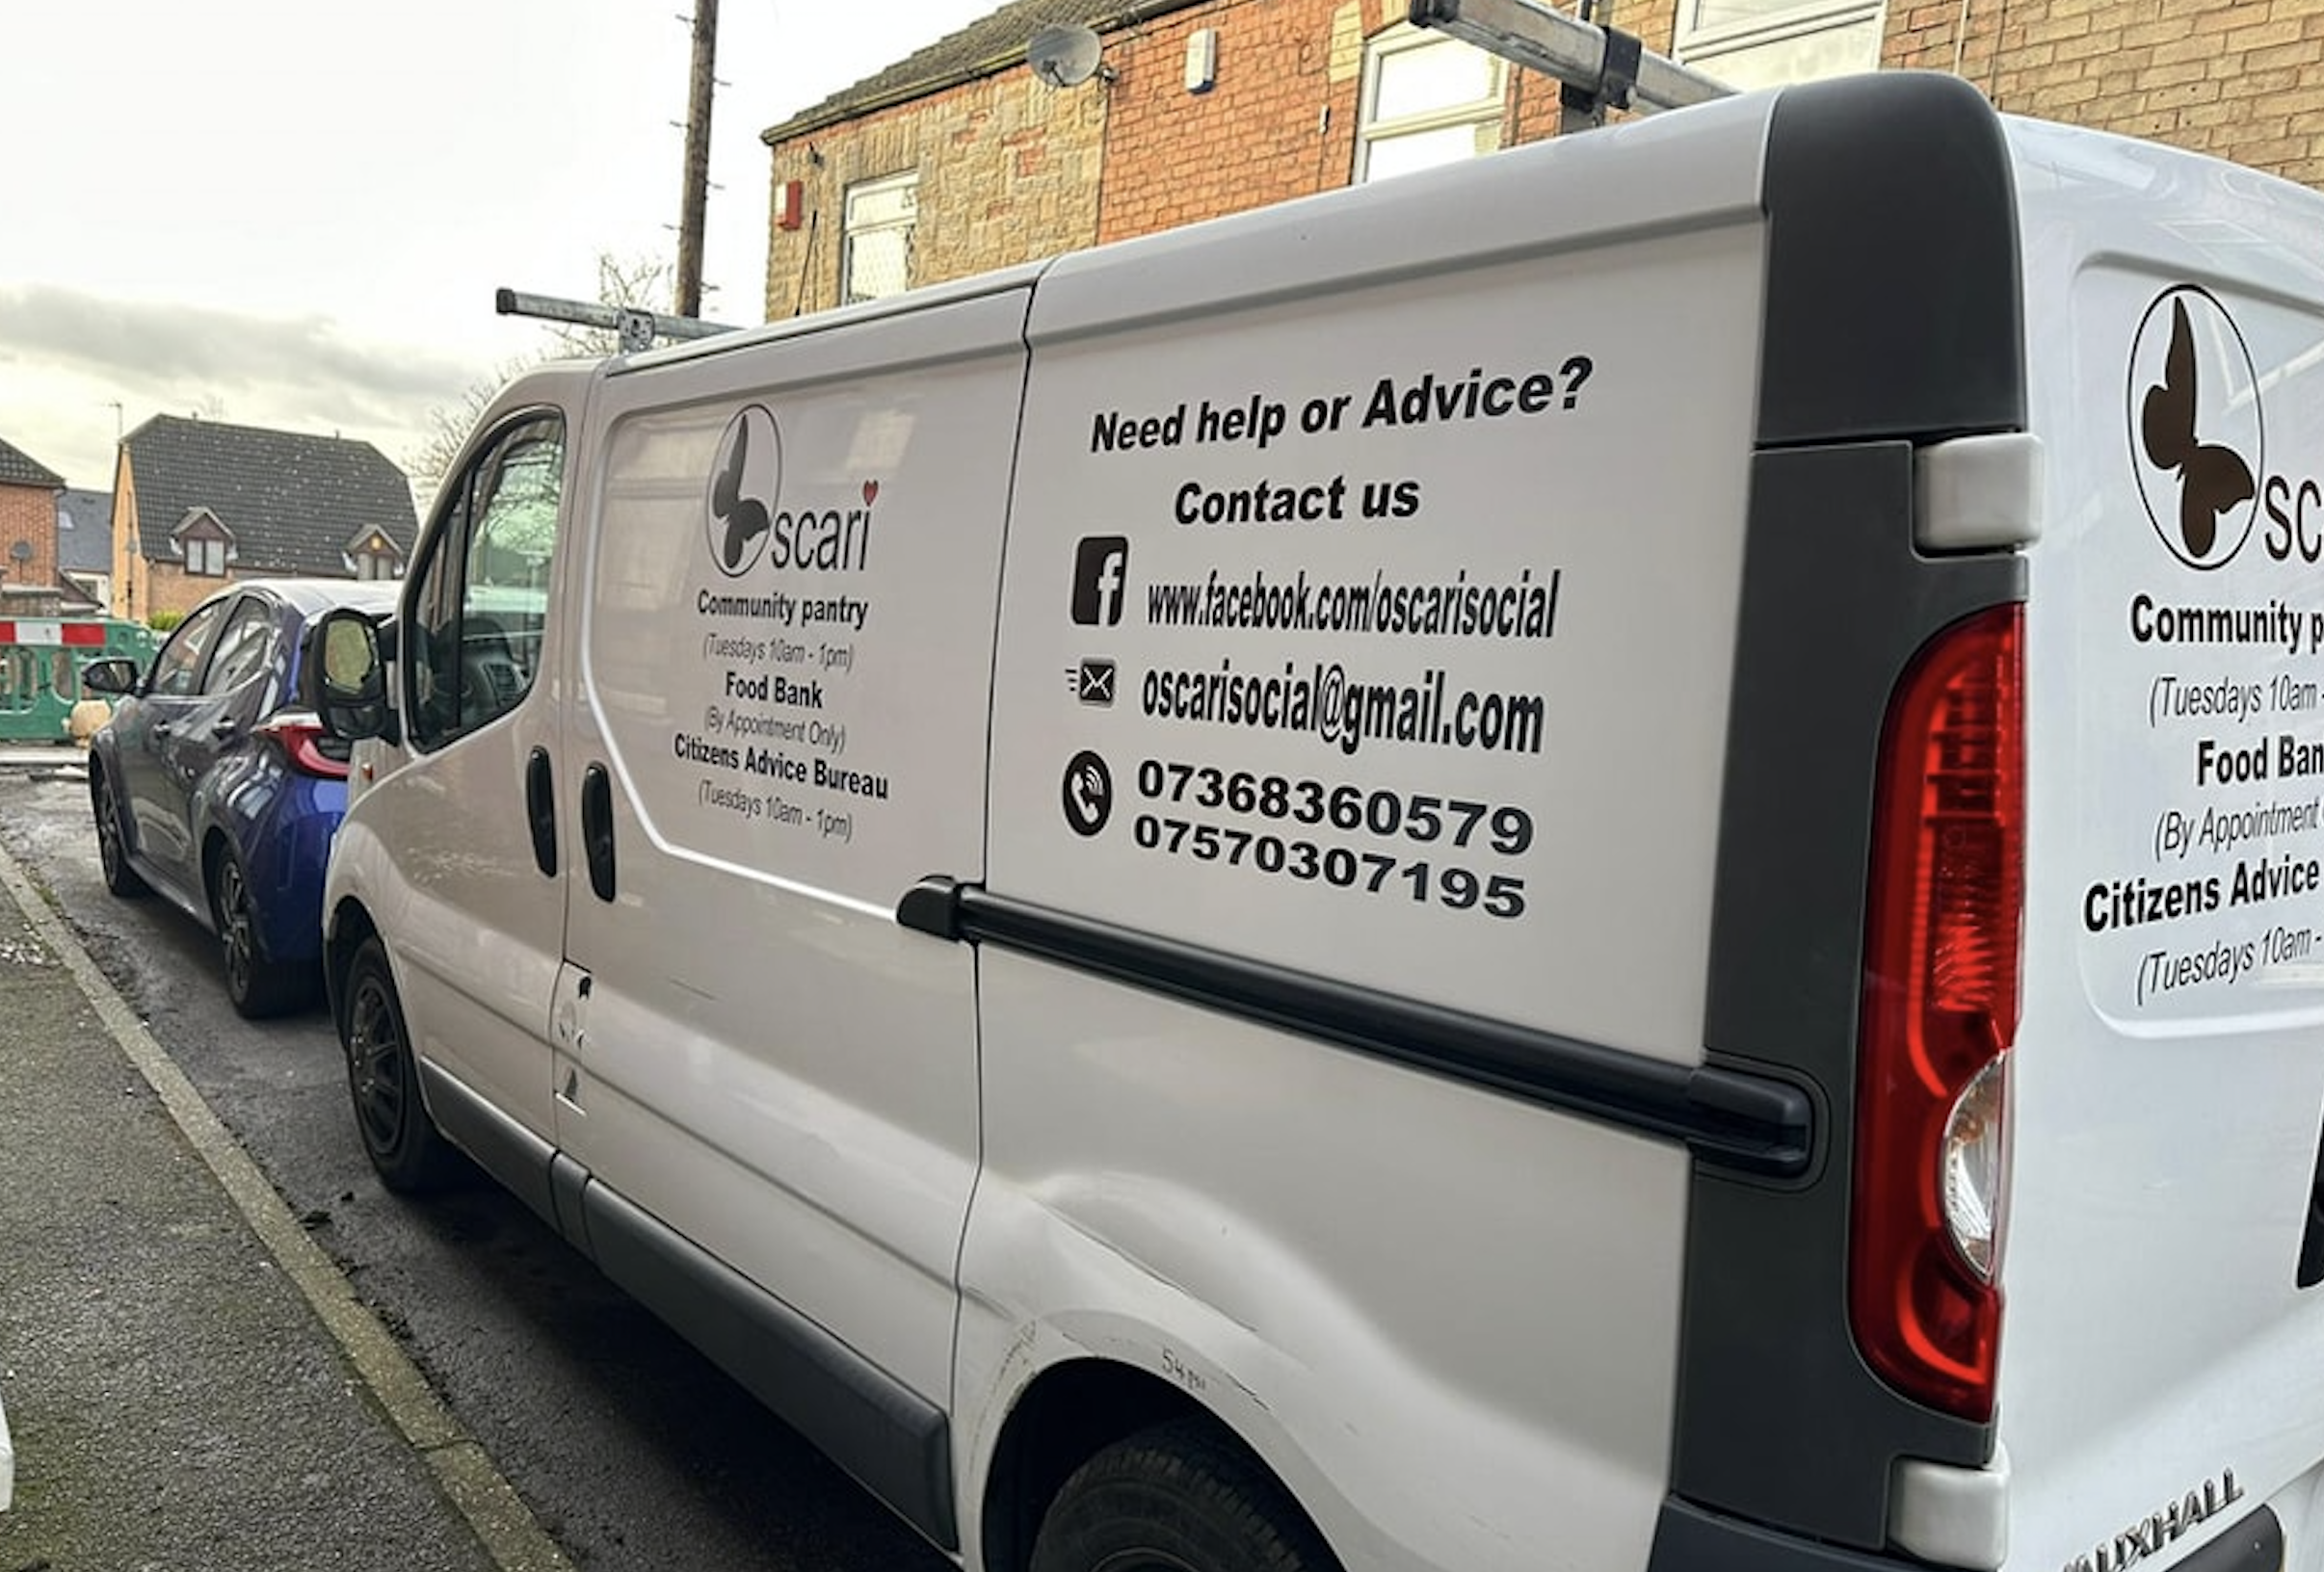 Charity van gets a ‘bling’ makeover